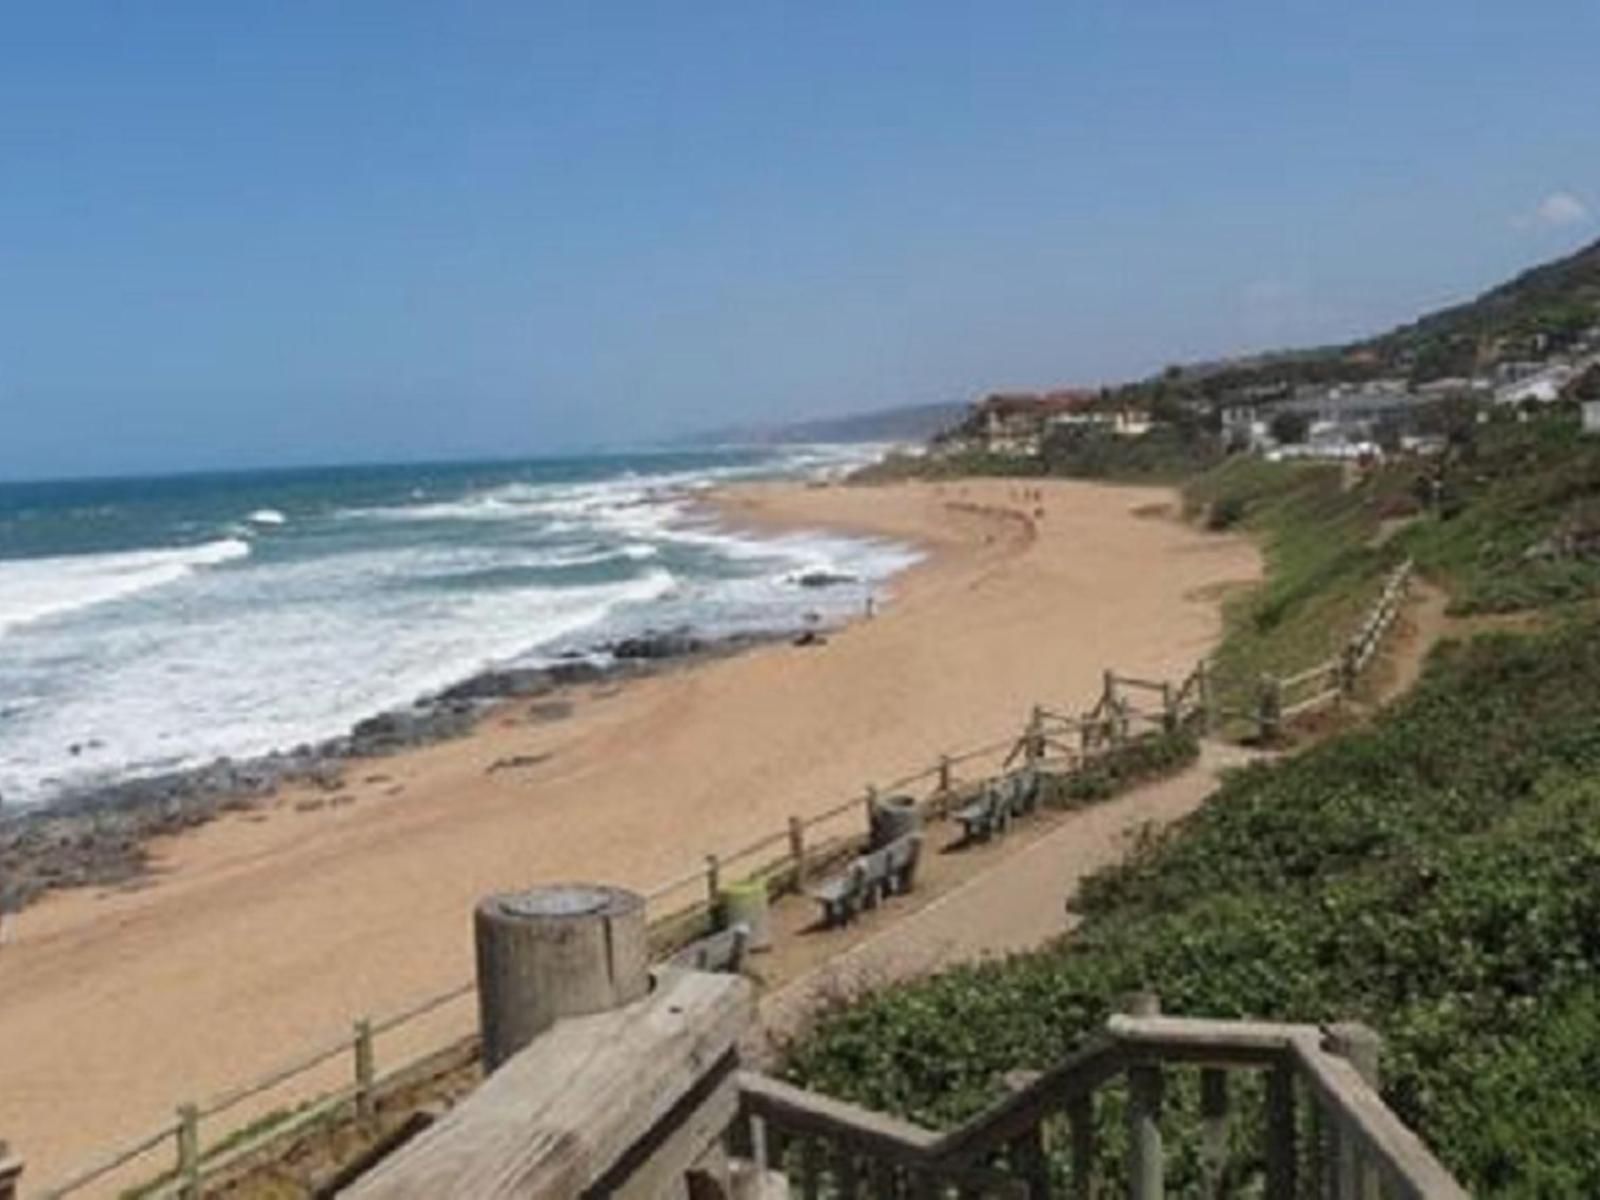 Villa Capri Guest House Ballito Kwazulu Natal South Africa Complementary Colors, Beach, Nature, Sand, Ocean, Waters